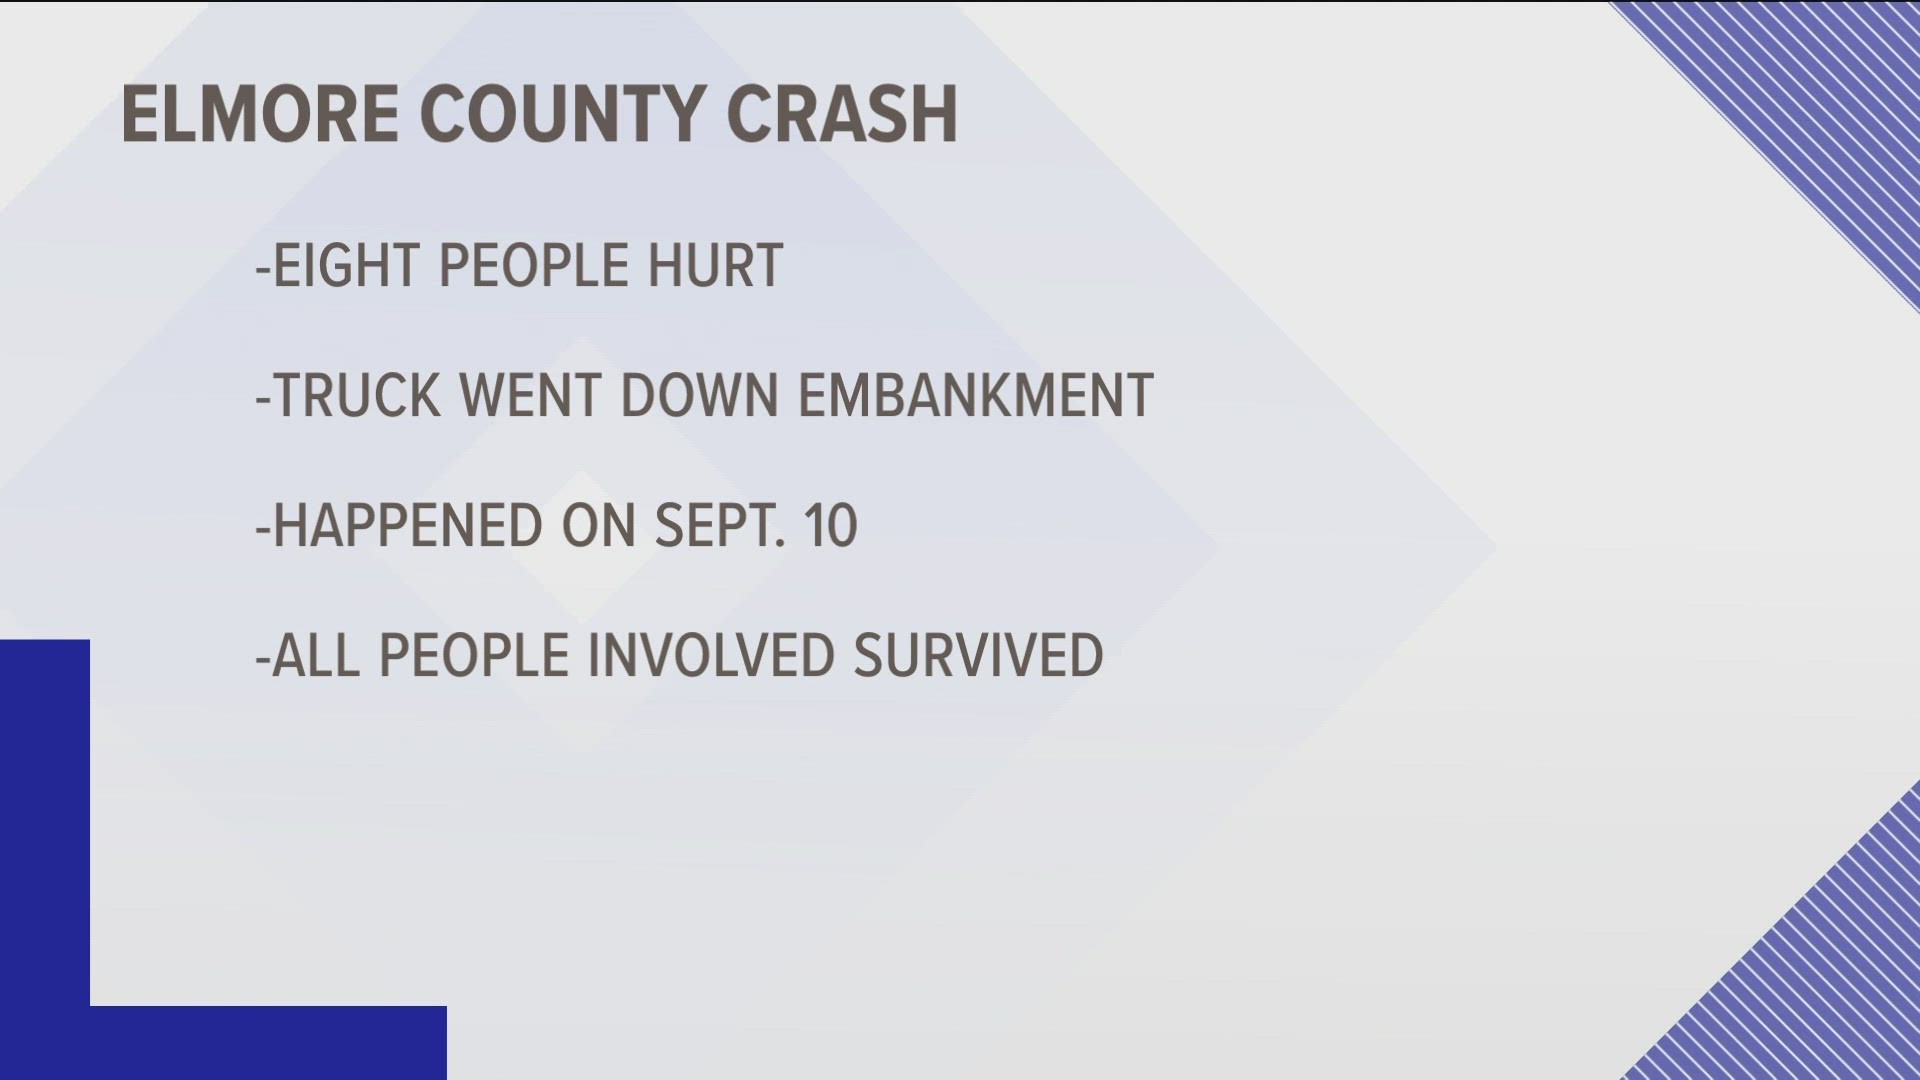 The responding search and rescue team rescued all eight people involved in the crash.